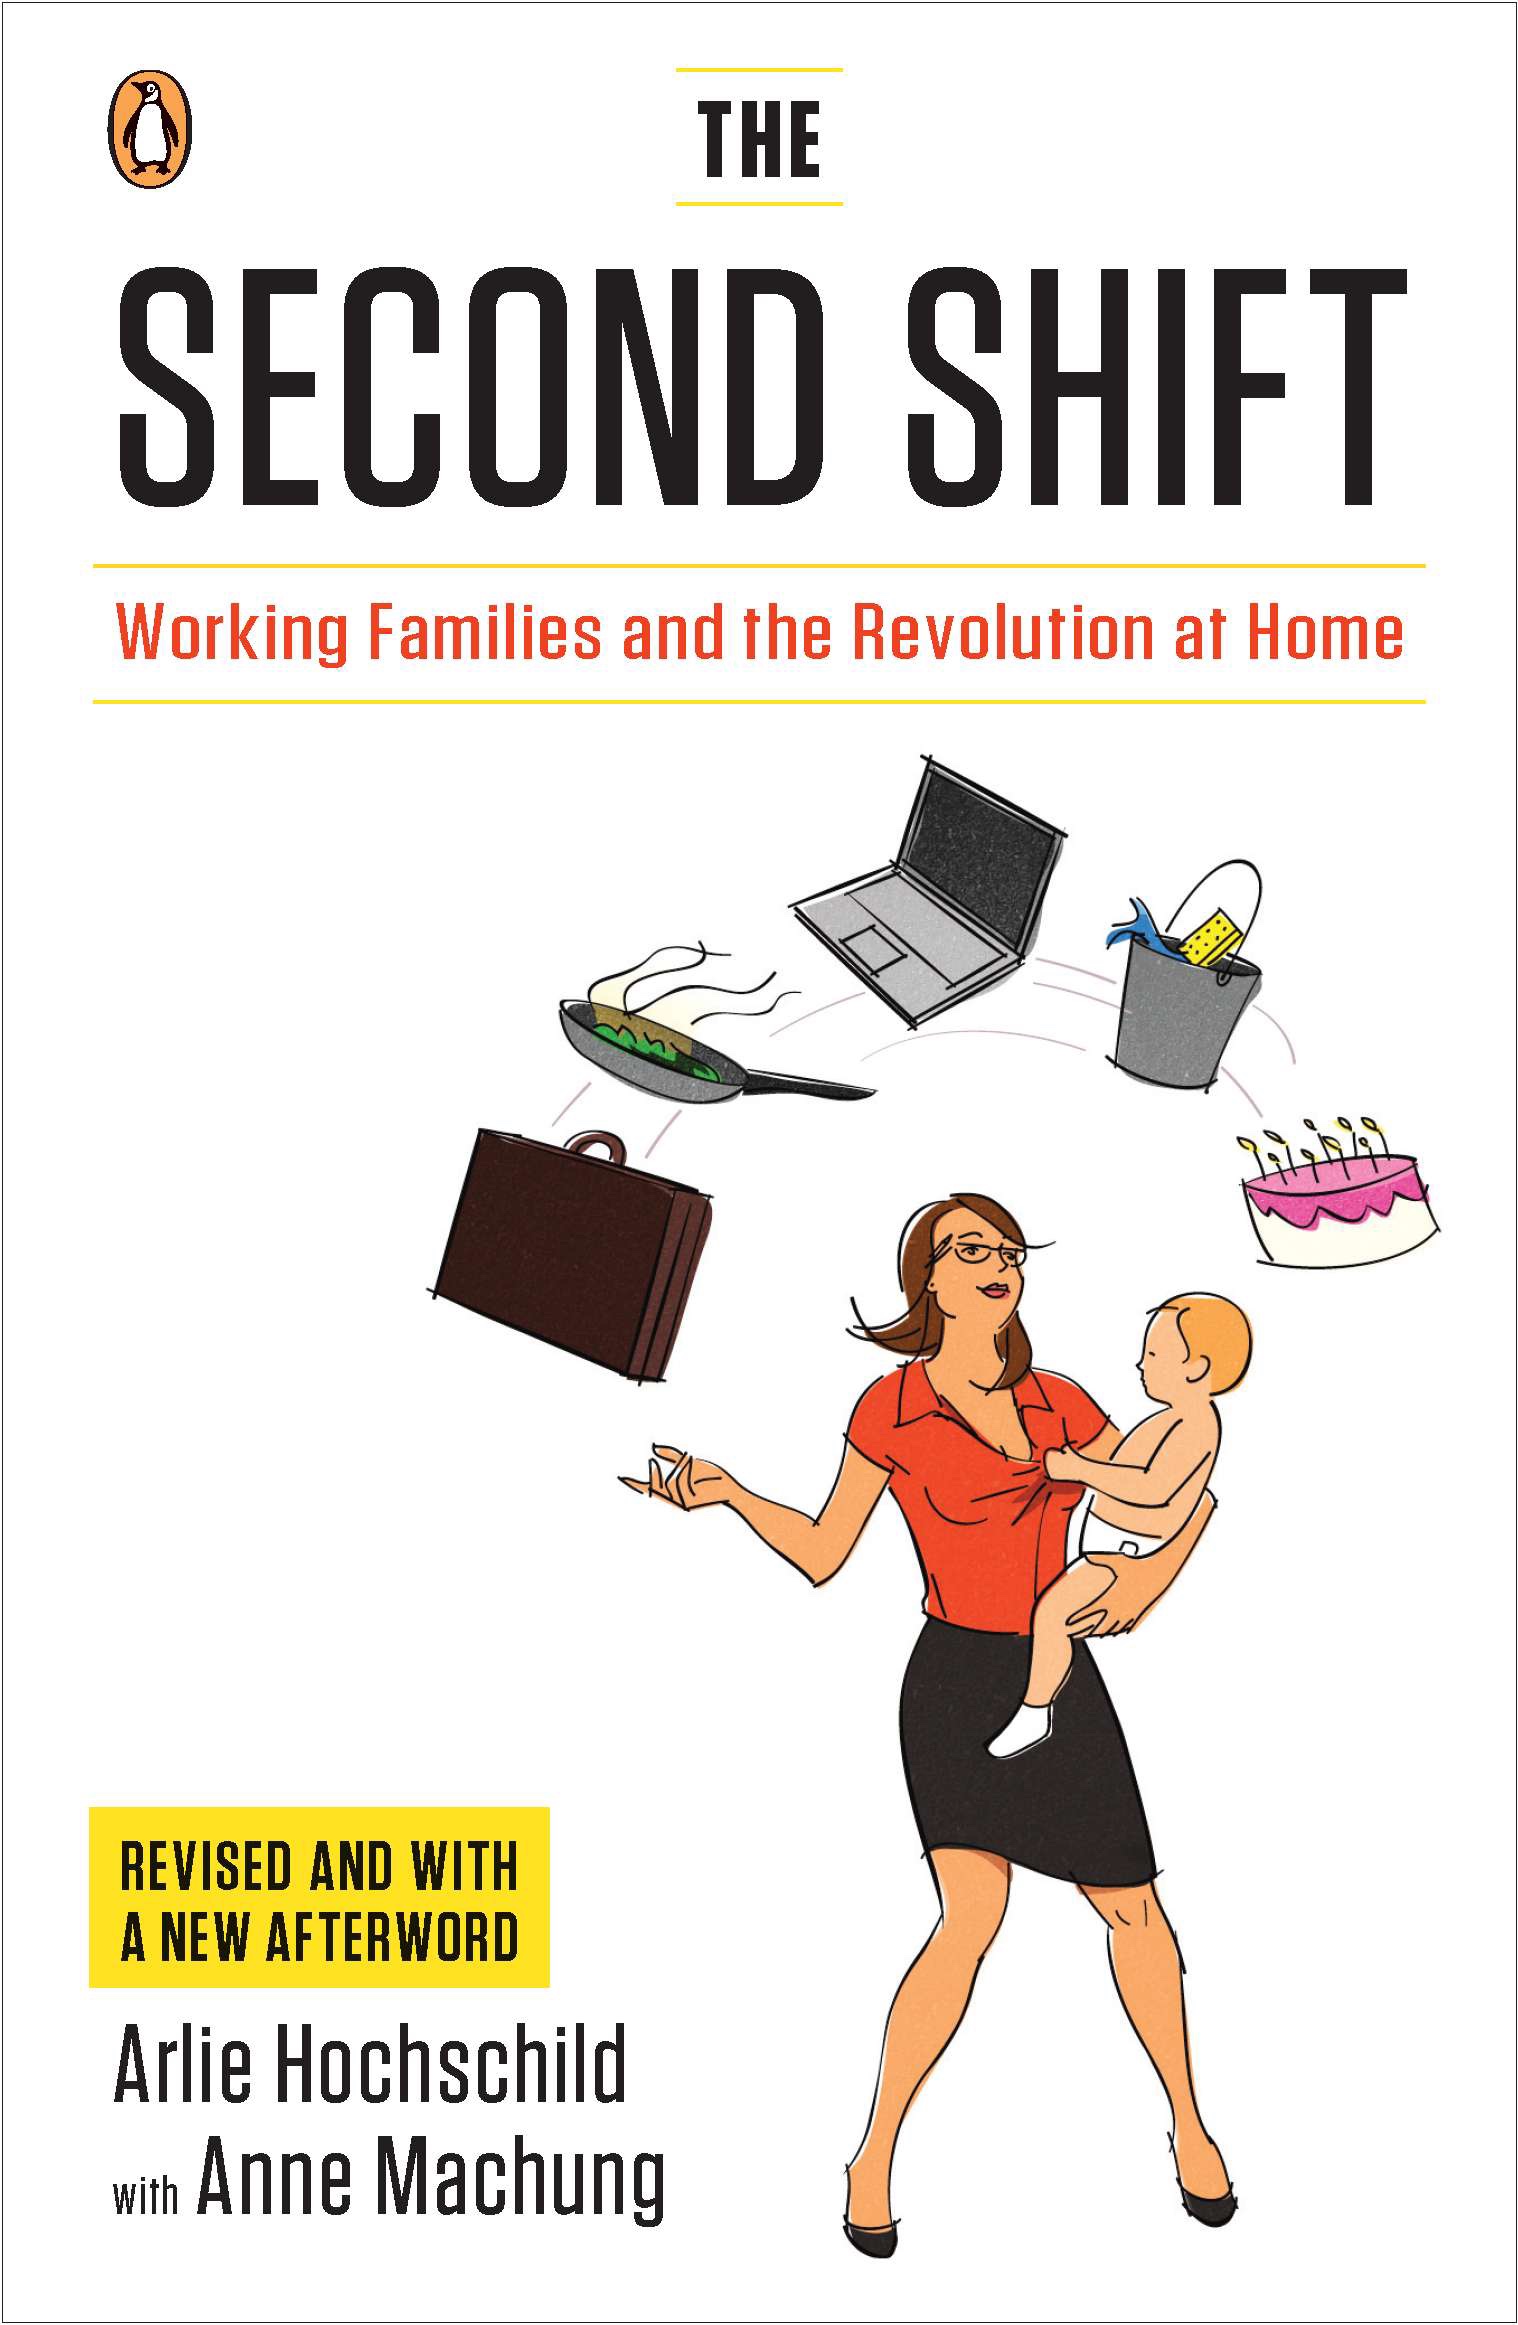 Book cover with an illustration of a woman in business attire, holding a baby and juggling a briefcase, a cooking pan, a laptop, a cleaning bucket, and a birthday cake